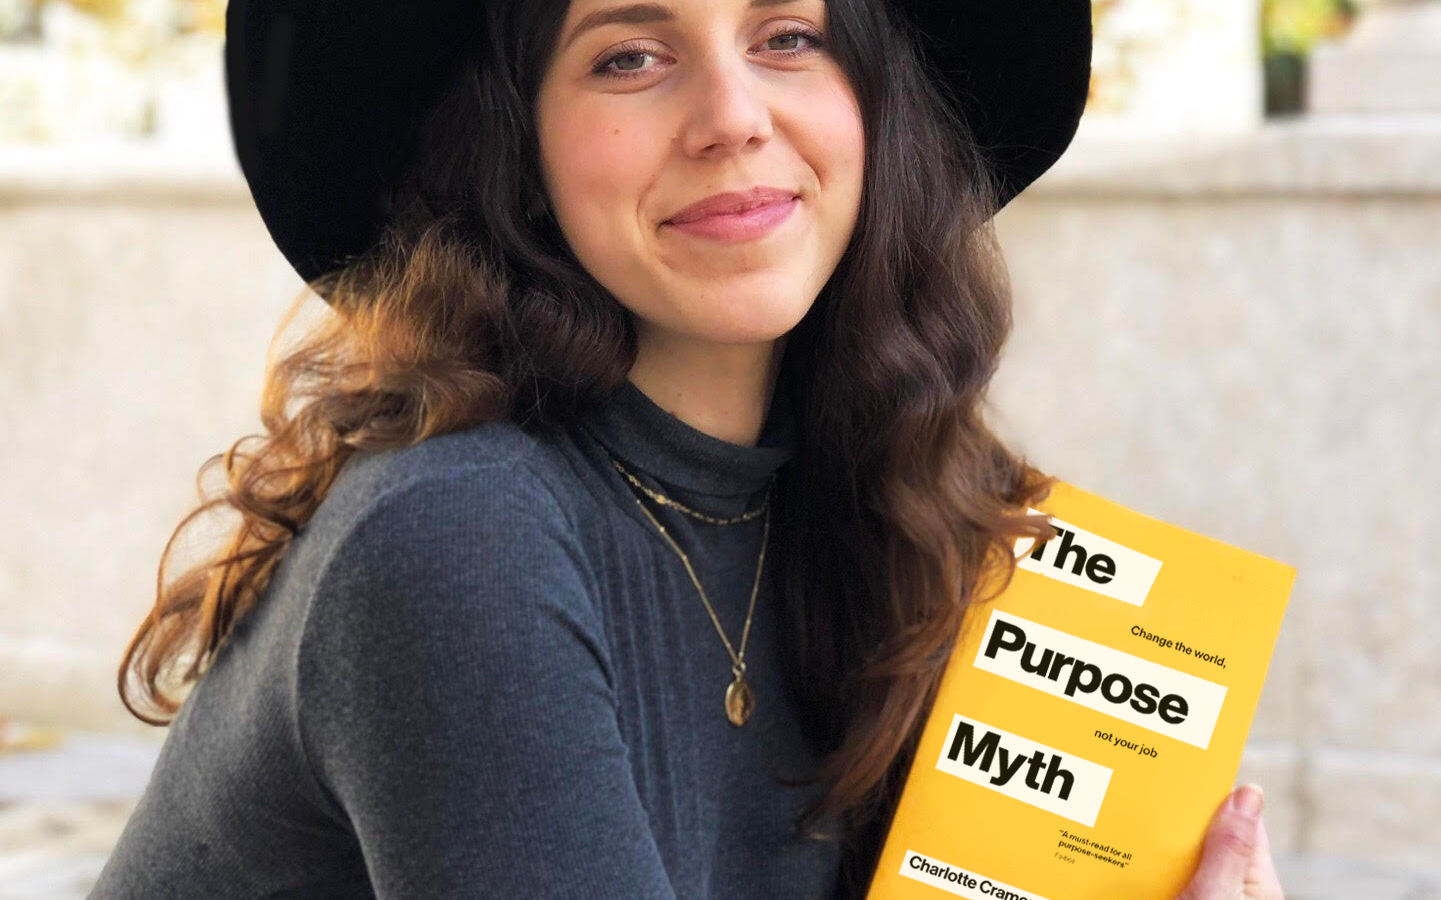 Charlotte Cramer, author of The Purpose Myth, holds book